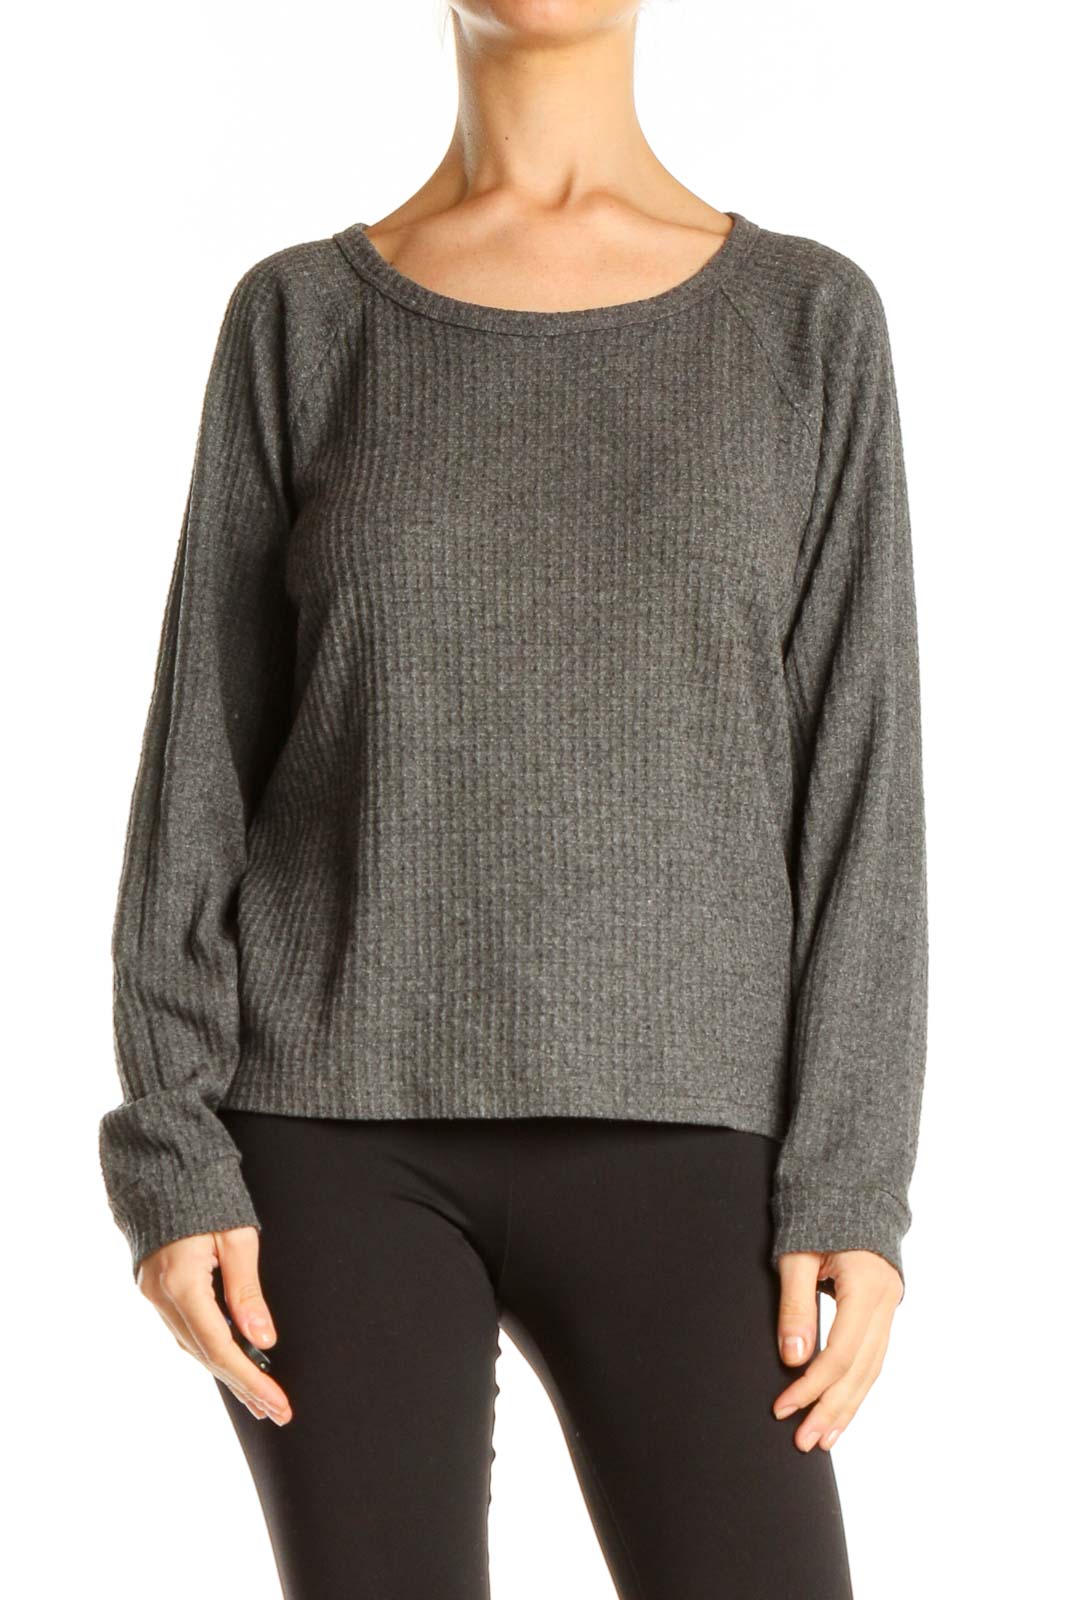 Gray Casual Long Sleeve Top Front